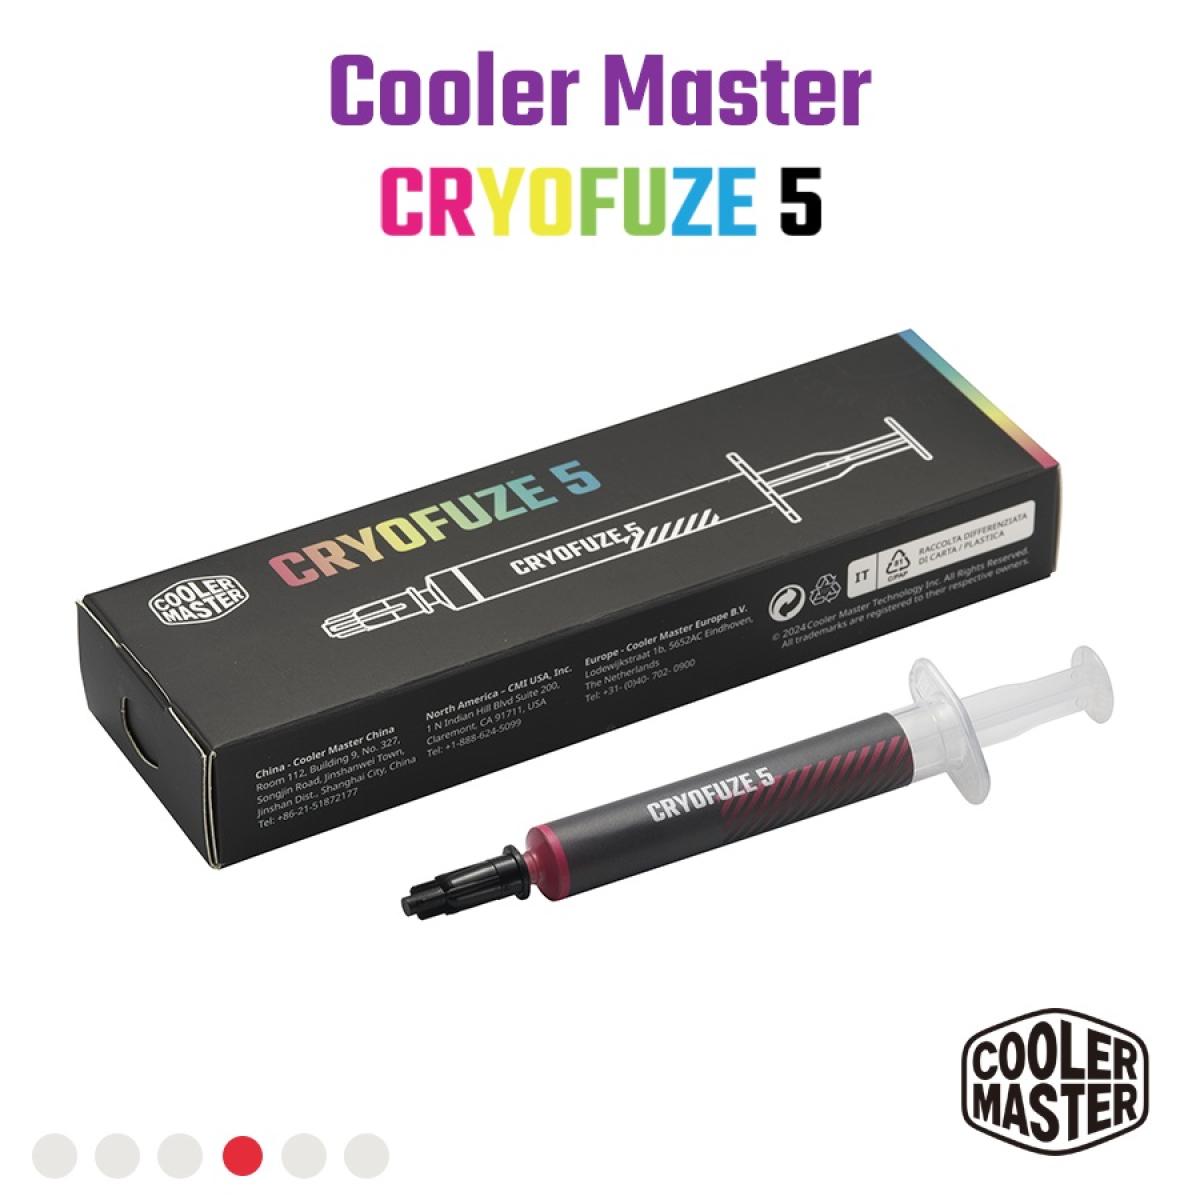 Cooler Master CRYOFUZE 5 (Red) High performance Thermal Paste, 12.6 W/mK High Thermal Conductivity w/ Low Thermal Impedance - 3g Weight